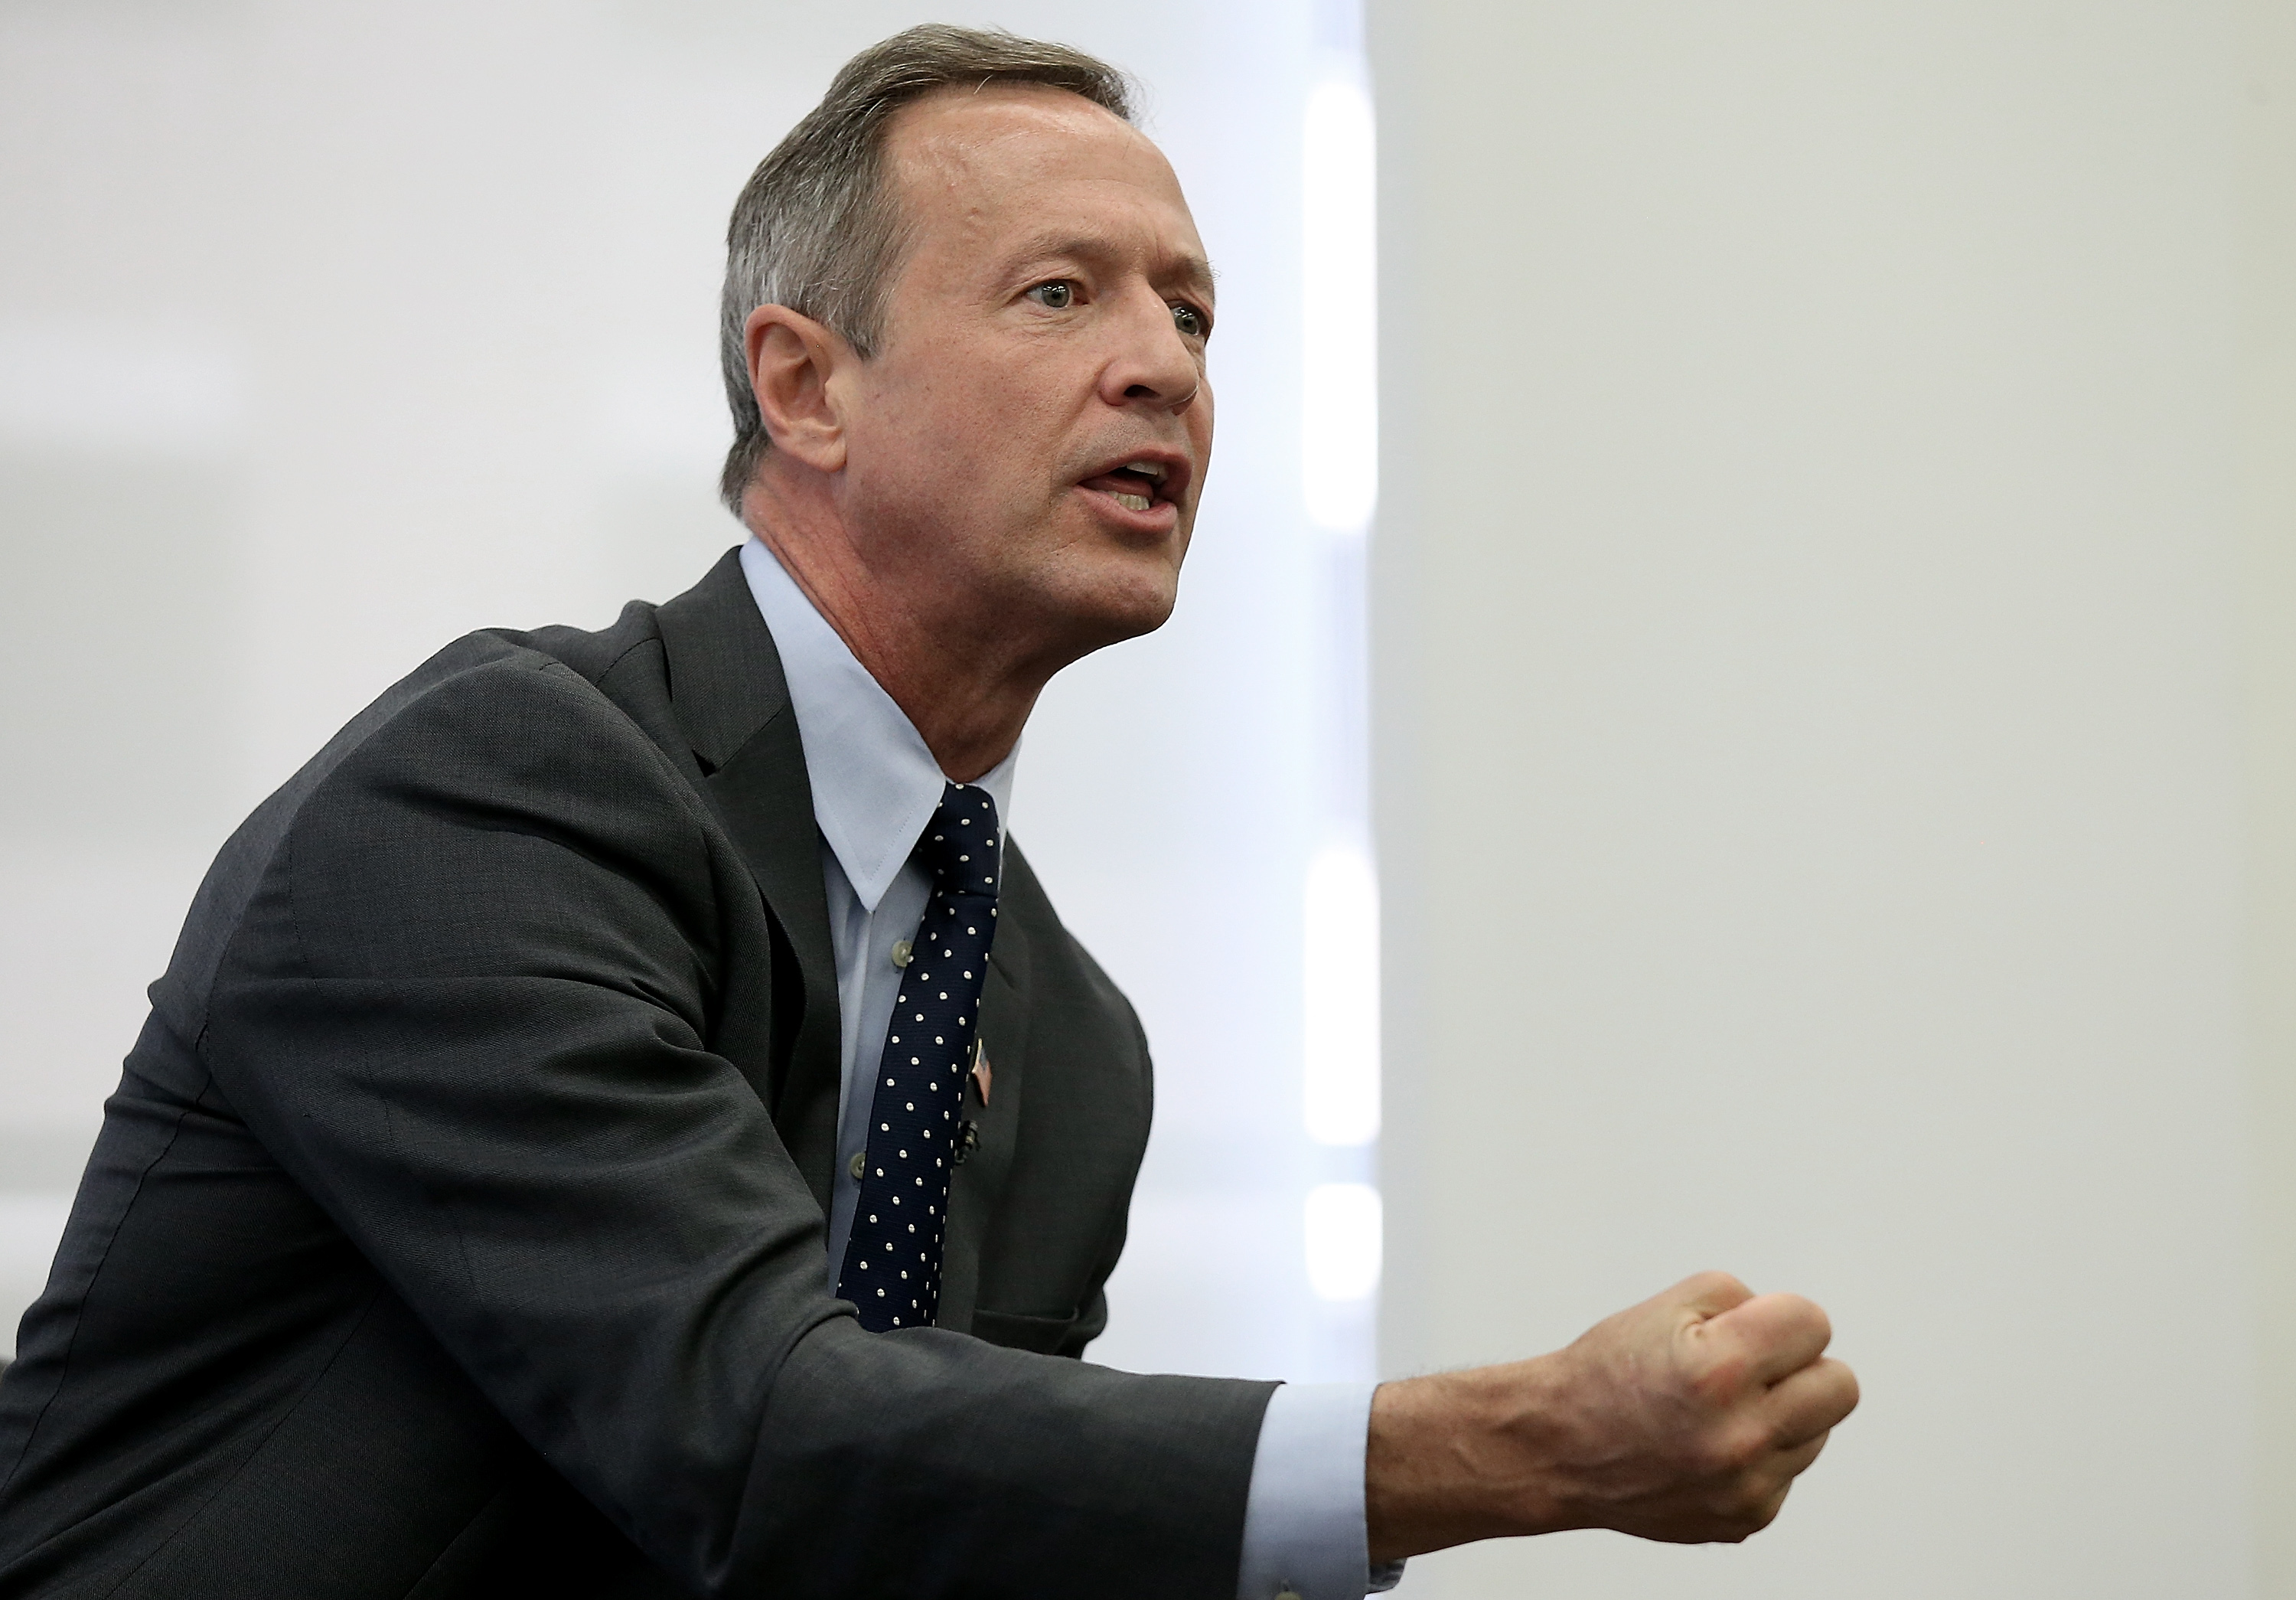 Democratic Presidential Candidate Martin O'Malley Participates In Wall Street Reform Discussion